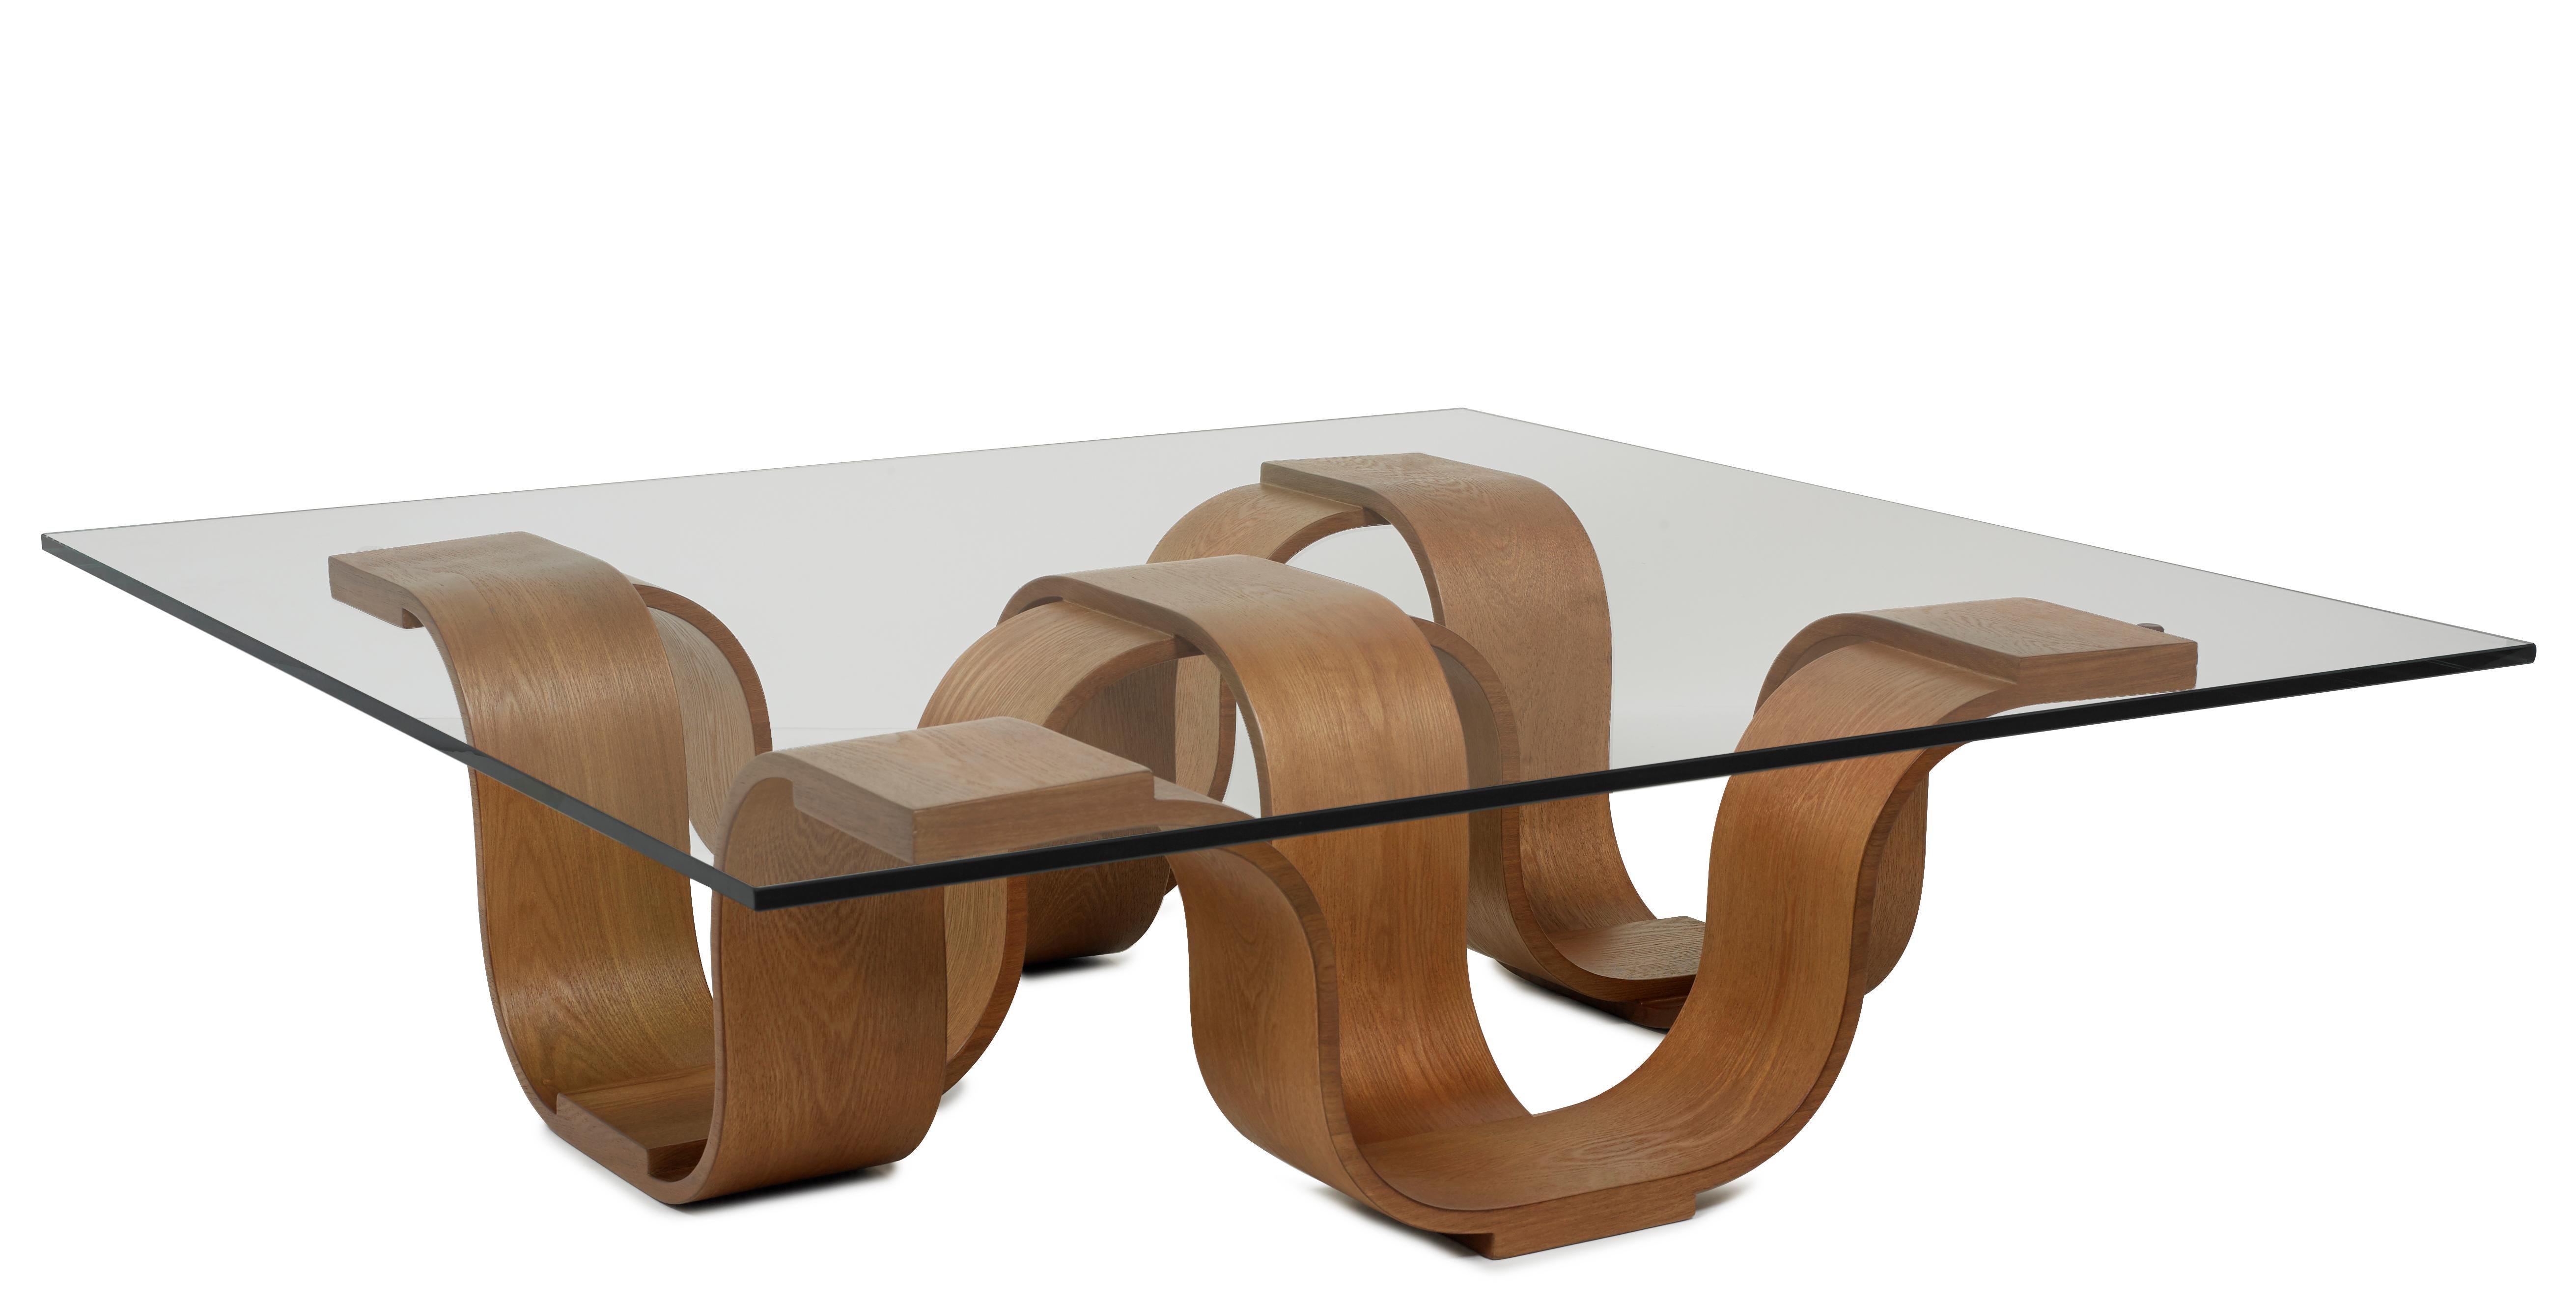 Bends and curves create a most pleasing organic feel in Oggetti’s Square Cocktail Table. Available in Medium Brown or a wash of Gray, the chesnut wood has a beautiful natural grain that shows through to great effect. Made in the Philippines by